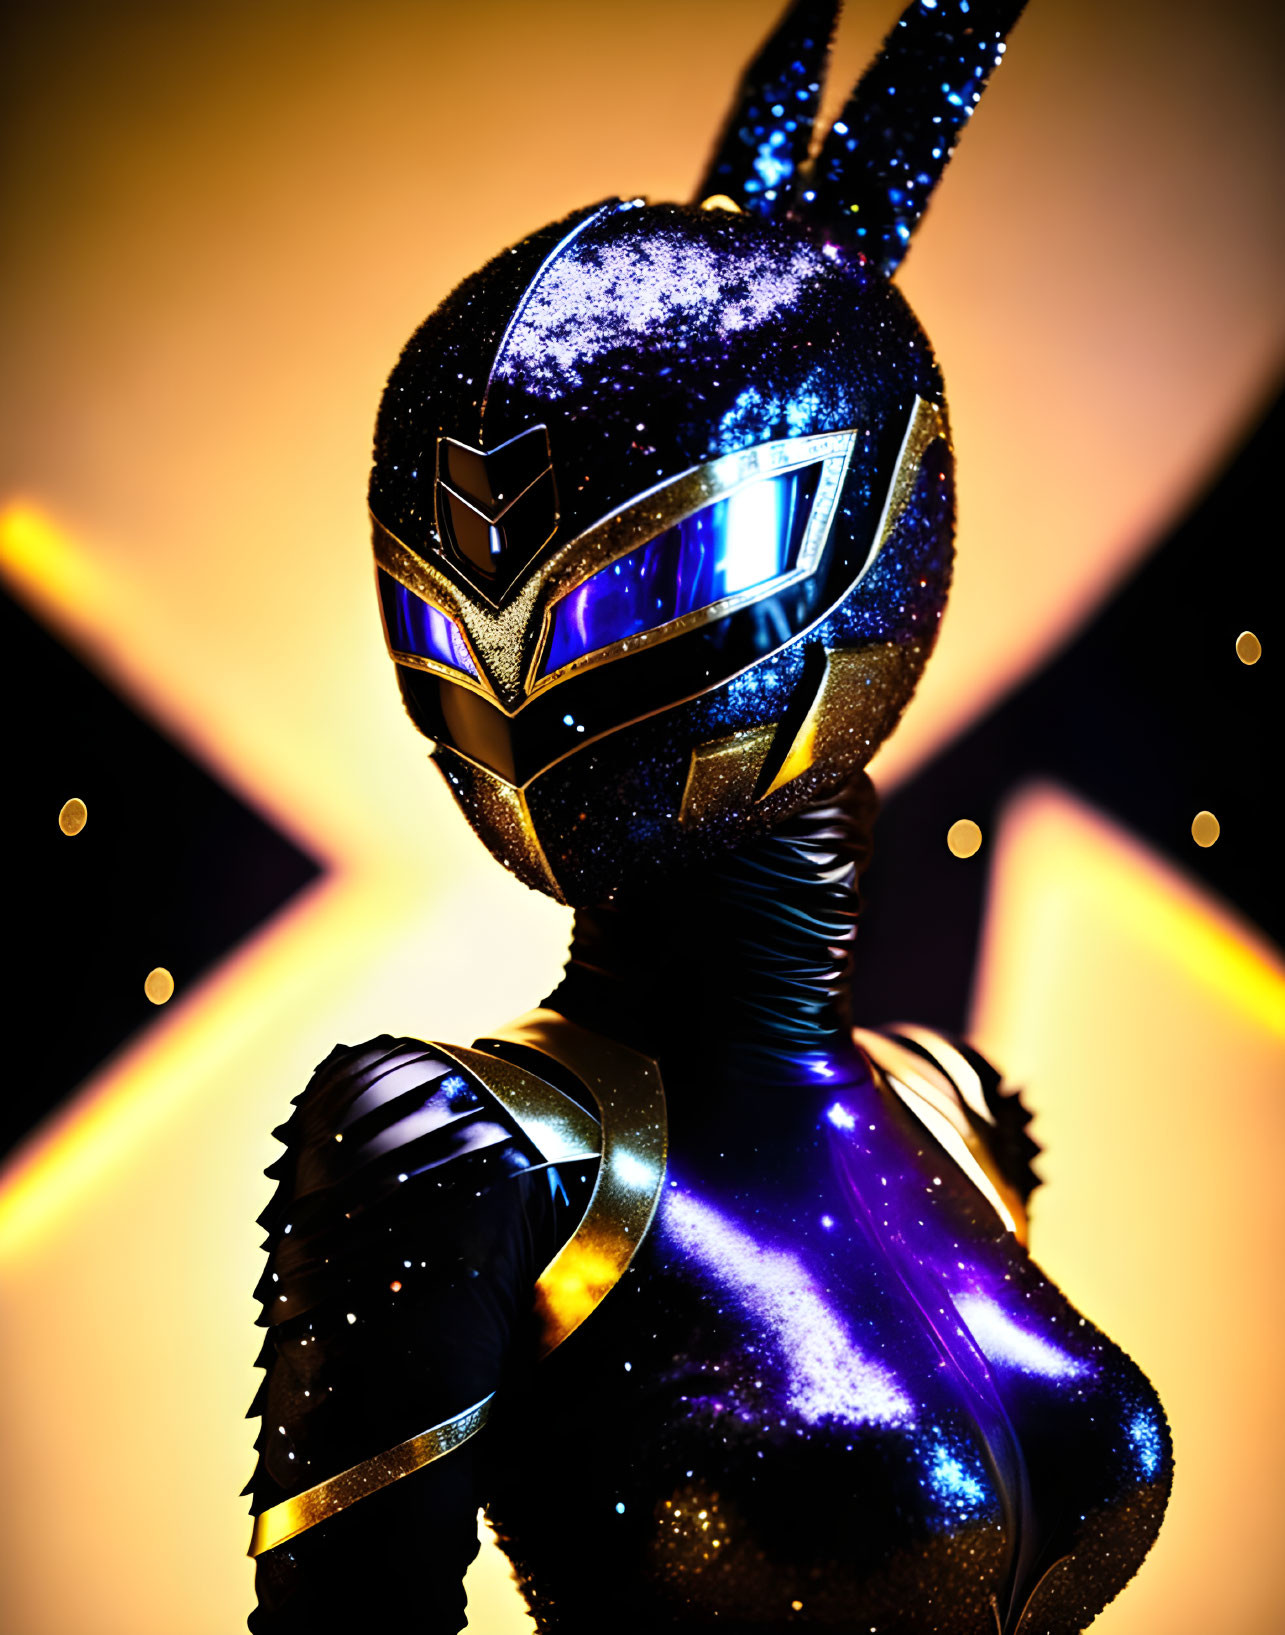 Person in Sparkling Cosmic Superhero Suit with Helmet and Visor Against Starry Golden Backdrop